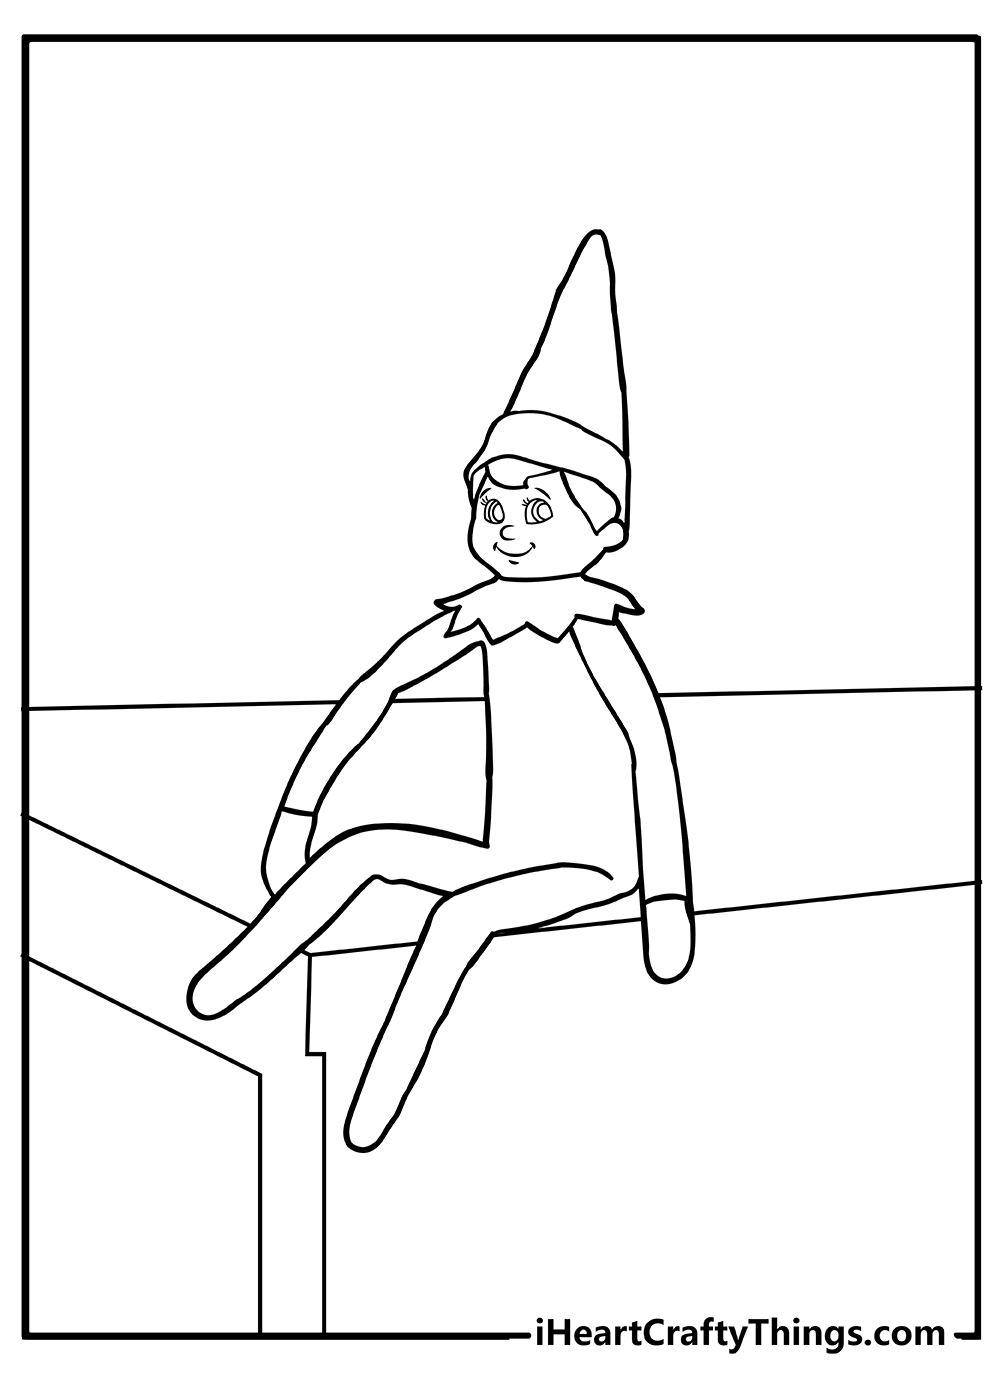 Printable Elf On The Shelf Coloring Pages Updated 20